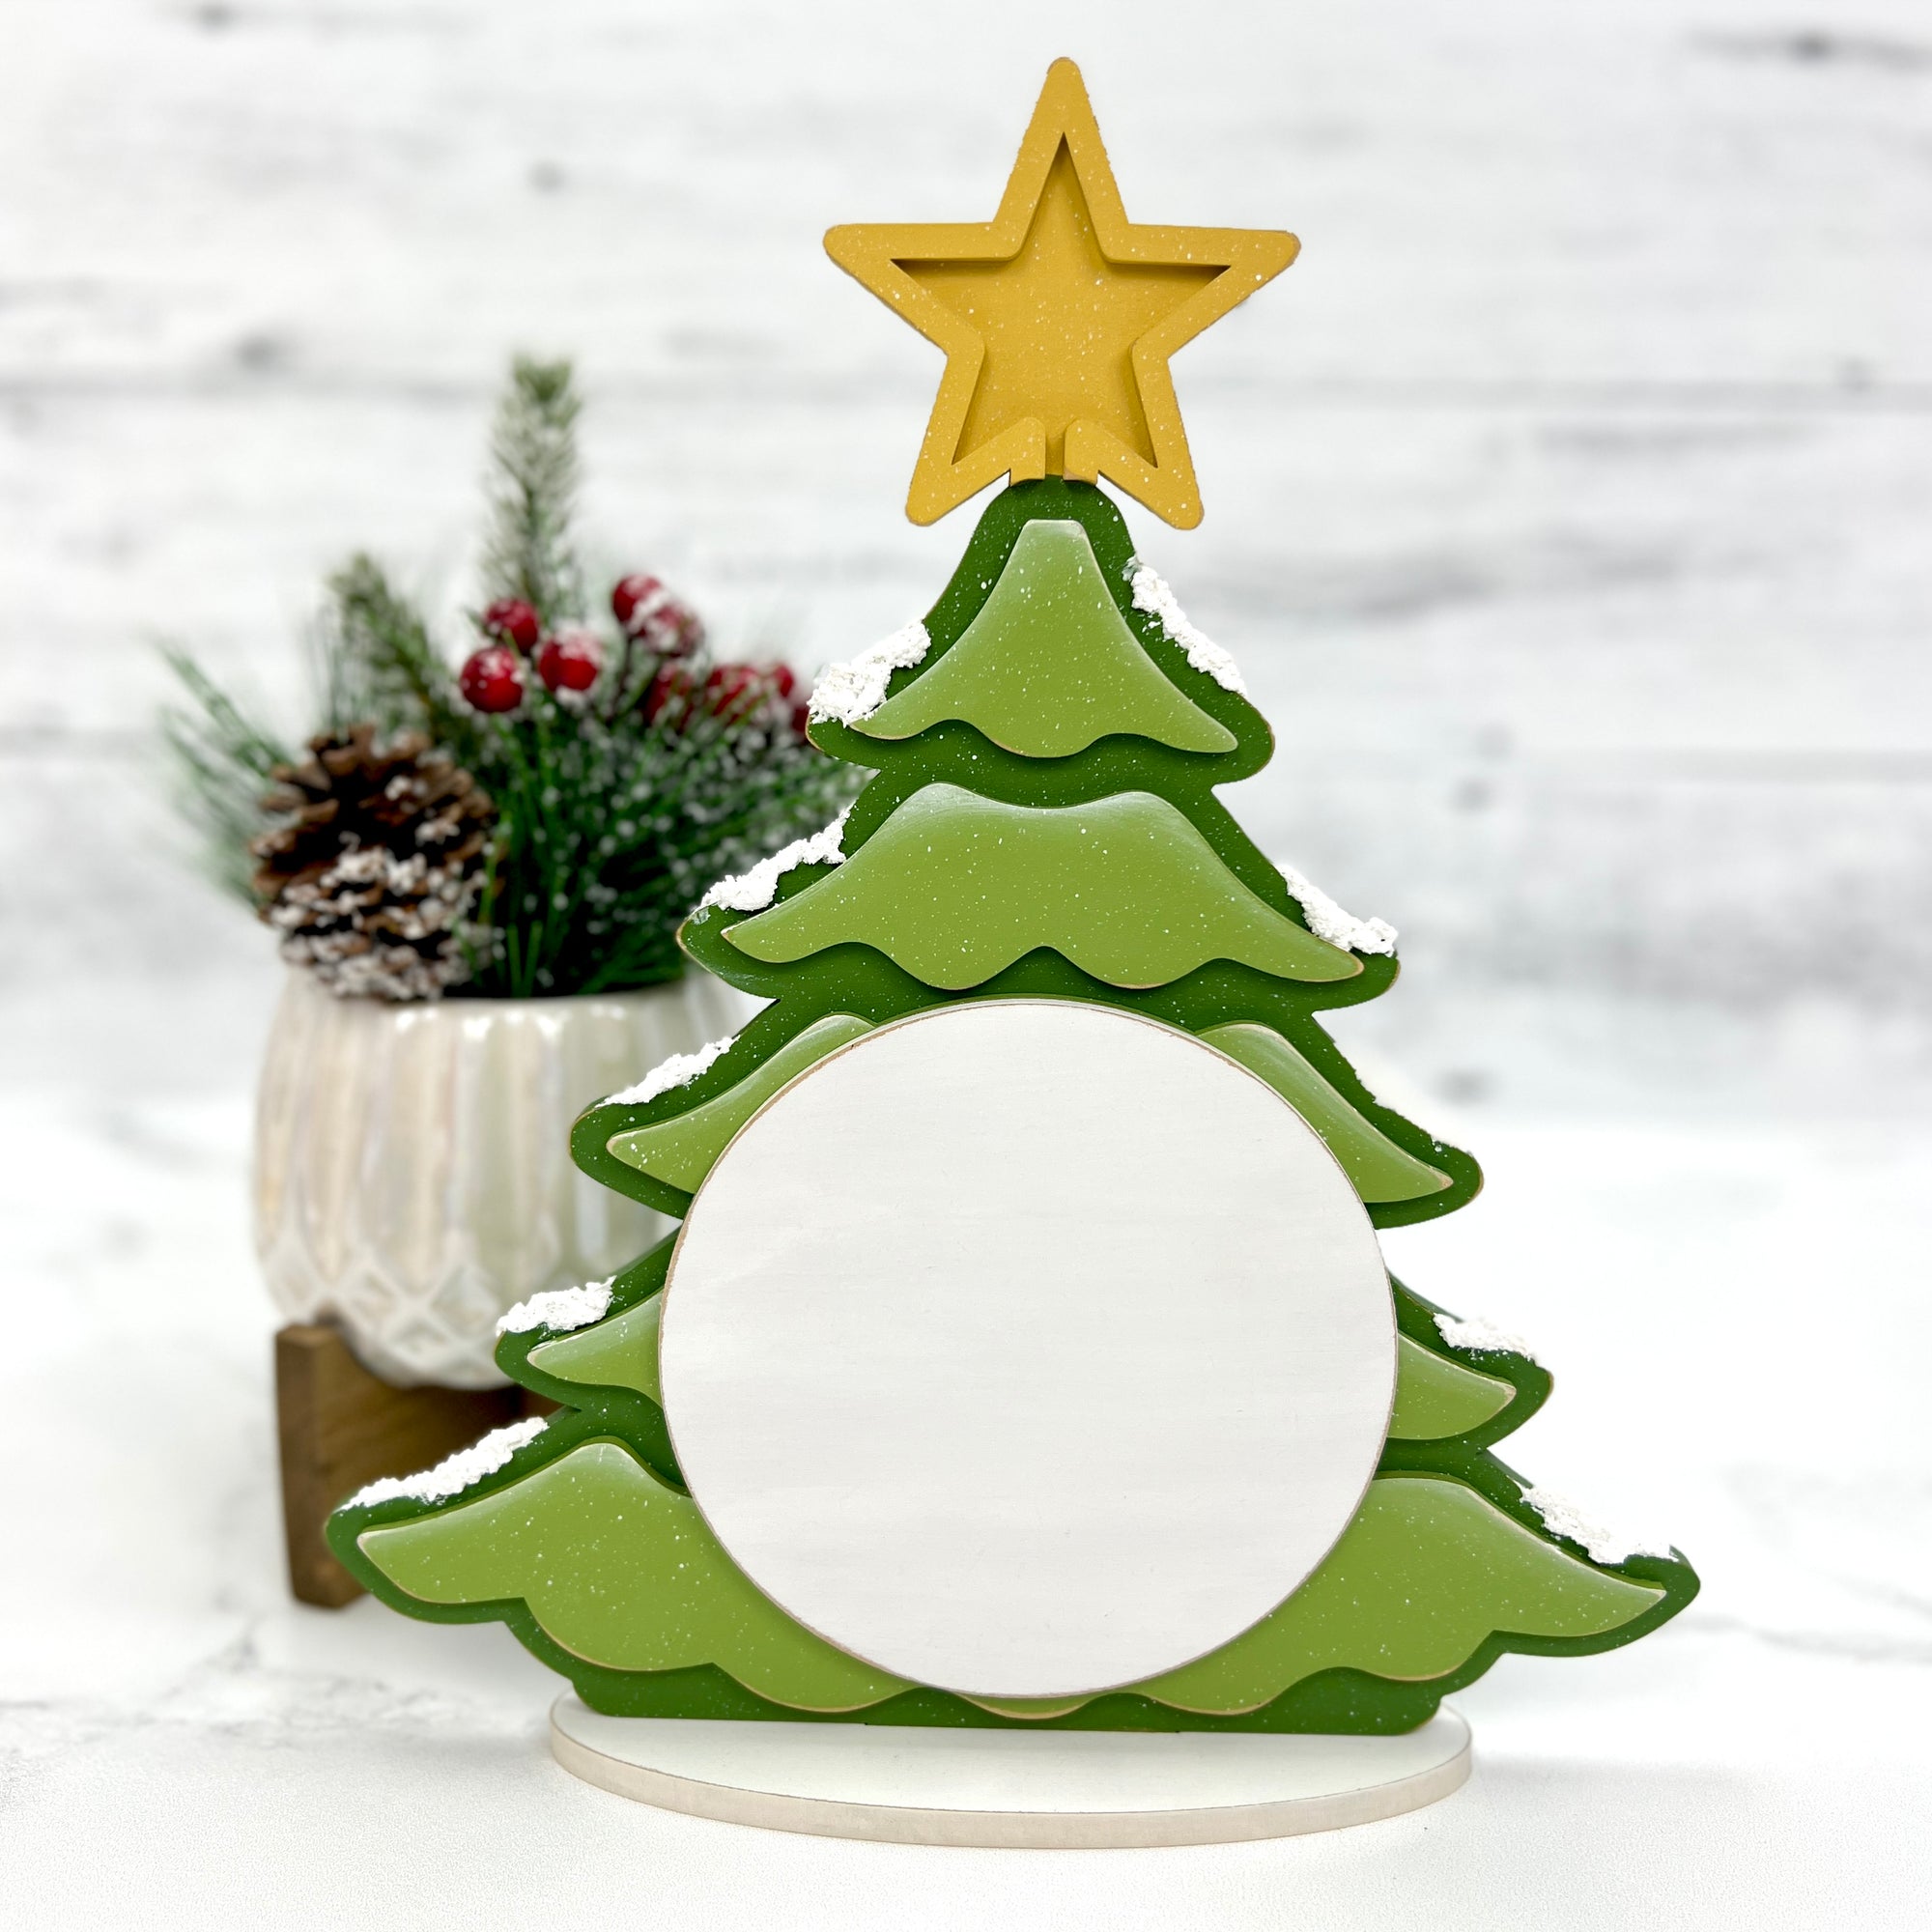 Green christmas tree with a gold star on top wood decor for displaying a finished cross stitch piece